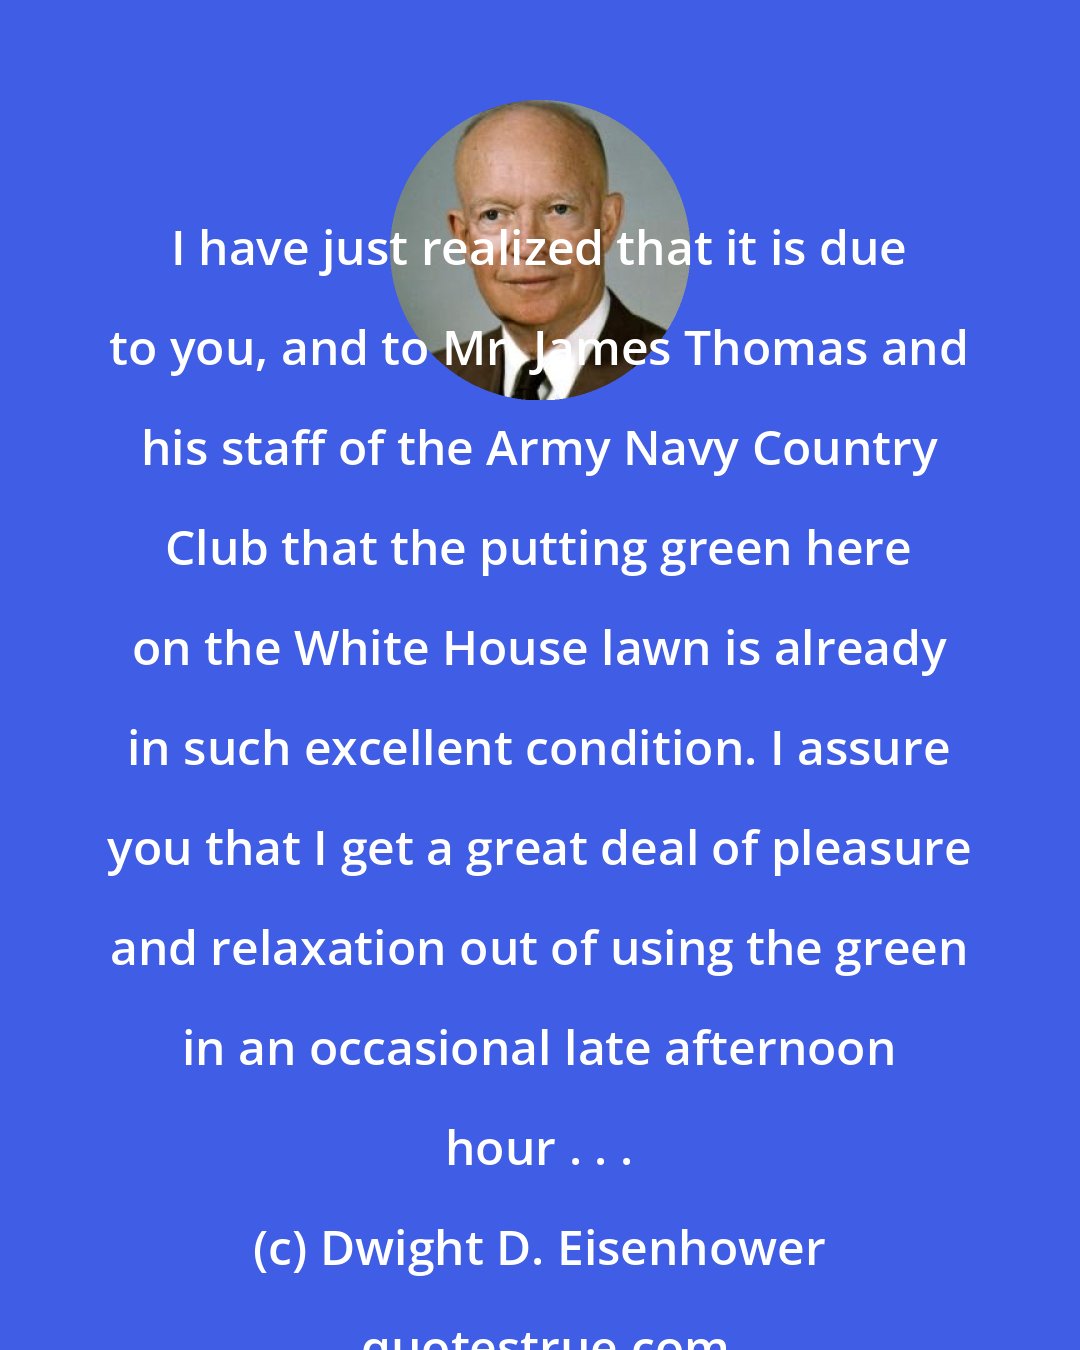 Dwight D. Eisenhower: I have just realized that it is due to you, and to Mr. James Thomas and his staff of the Army Navy Country Club that the putting green here on the White House lawn is already in such excellent condition. I assure you that I get a great deal of pleasure and relaxation out of using the green in an occasional late afternoon hour . . .